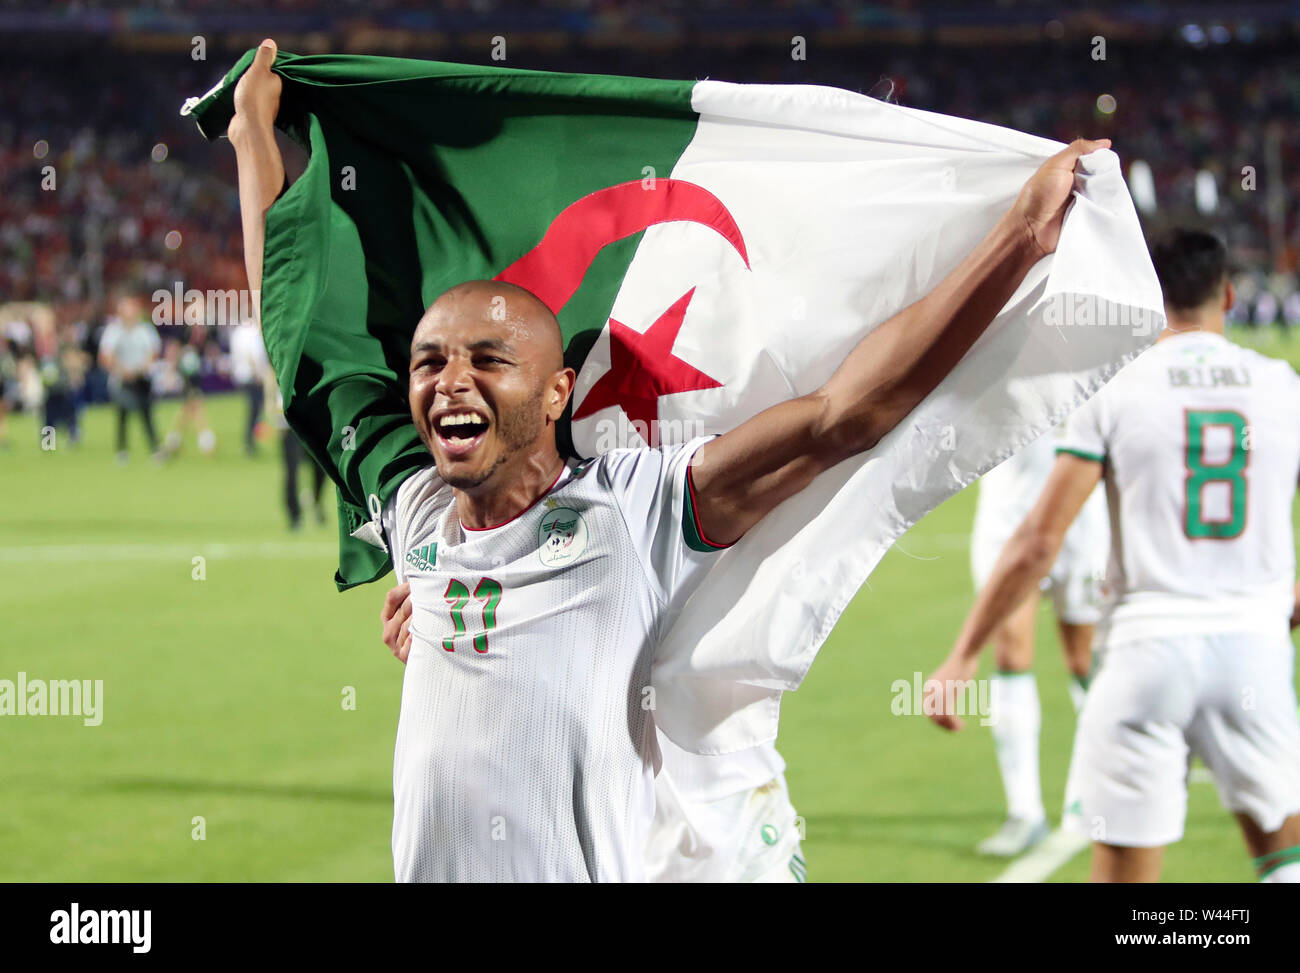 Cairo. 19th July, 2019. Algeria's Yacine Brahimi celebrates after the 2019 Africa Cup of Nations final match between Senegal and Algeria in Cairo, Egypt on July 19, 2019. Algeria won 1-0 and claimed the title. Credit: Ahmed Gomaa/Xinhua/Alamy Live News Stock Photo